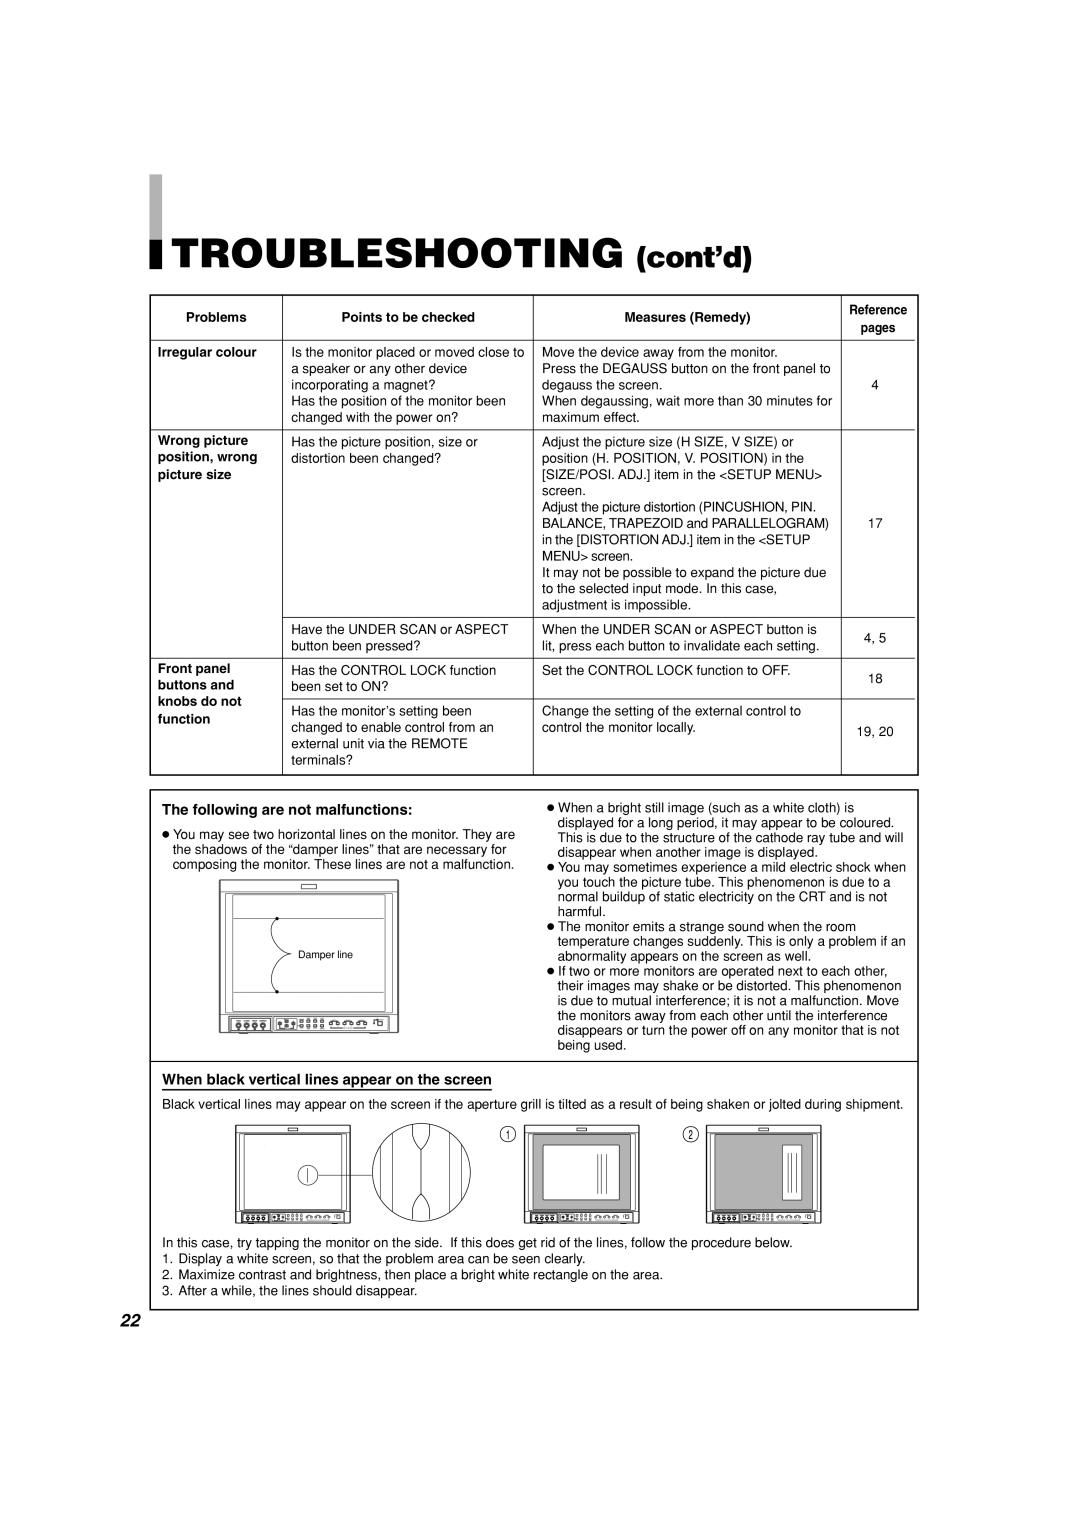 Panasonic BT-H1700AE manual TROUBLESHOOTING cont’d, The following are not malfunctions 